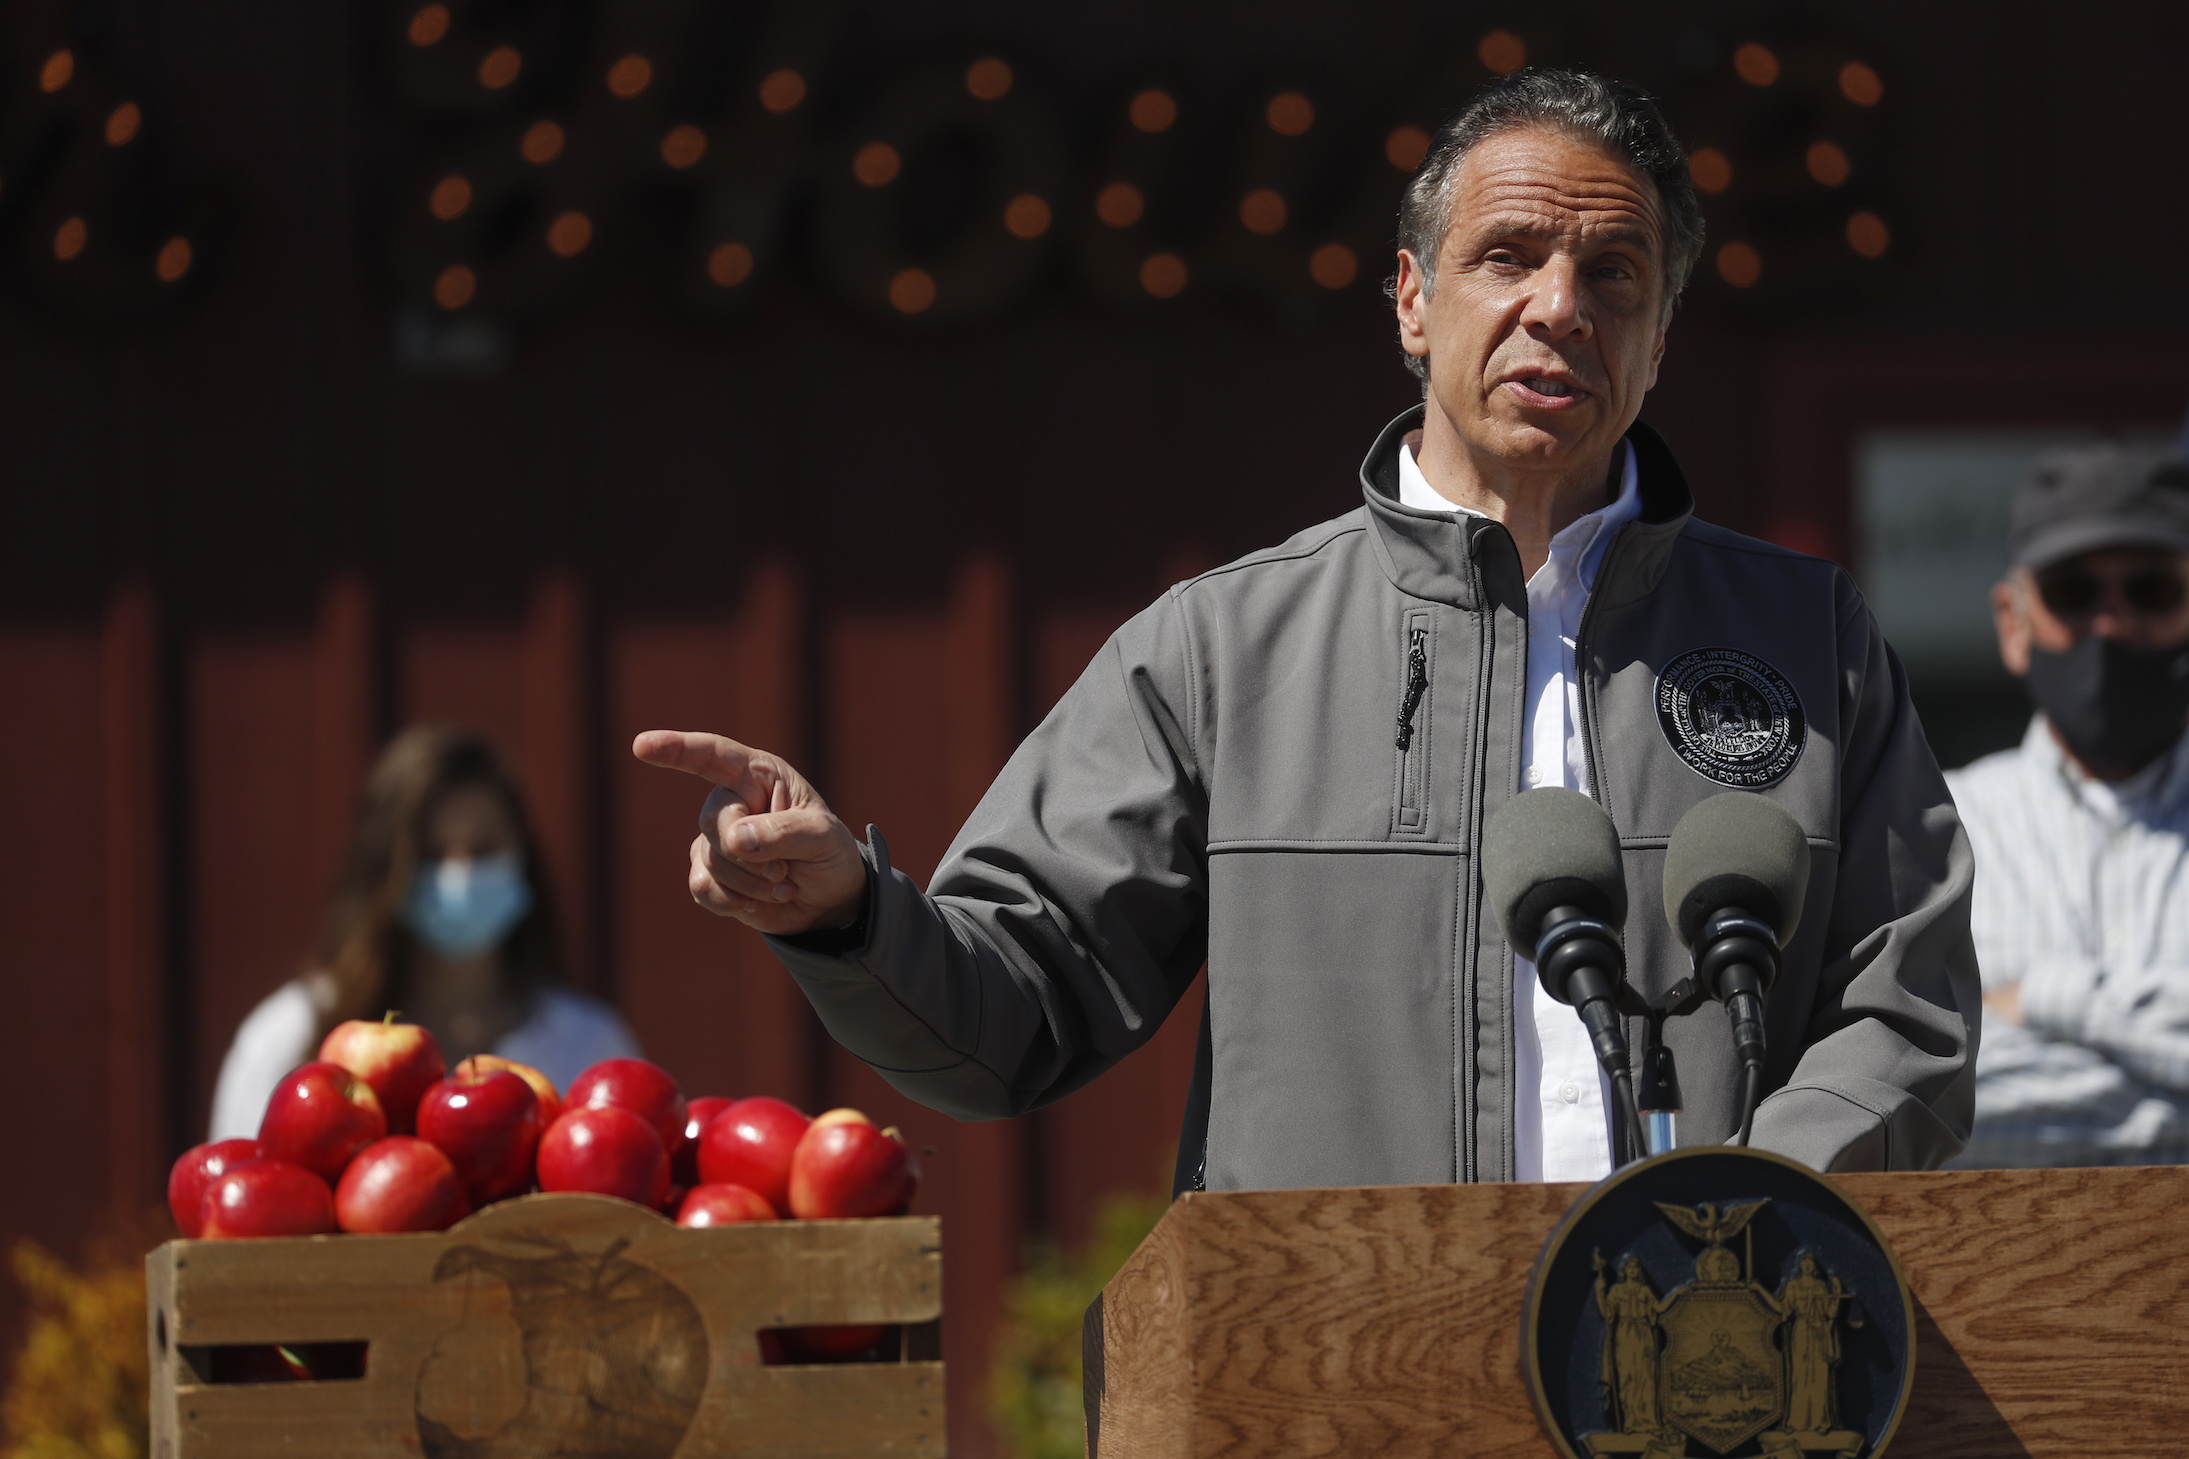 New York Governor Andrew Cuomo speaking at an event with a box of apples next to him